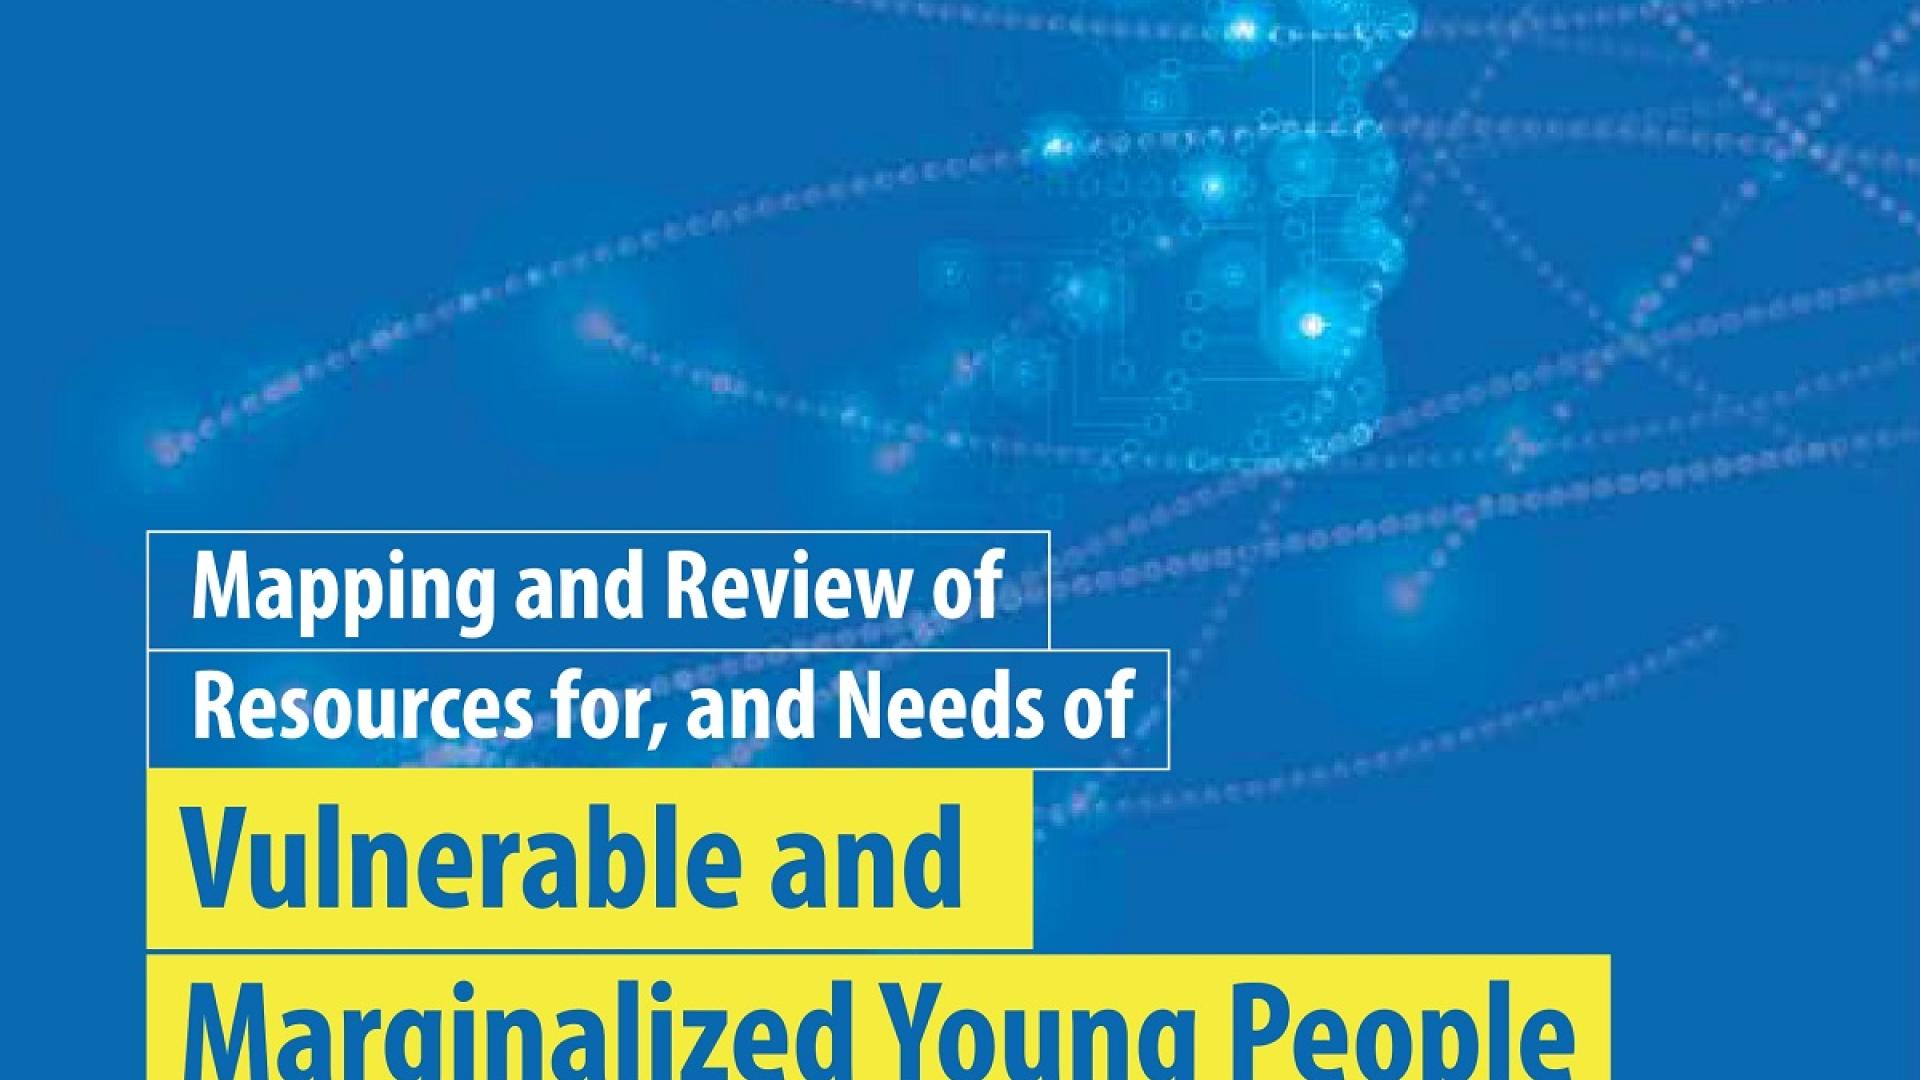 Resources for, and Needs of Vulnerable and Marginalized Young People on Digital Literacy, Safety and Participation | United Nations Development Programme